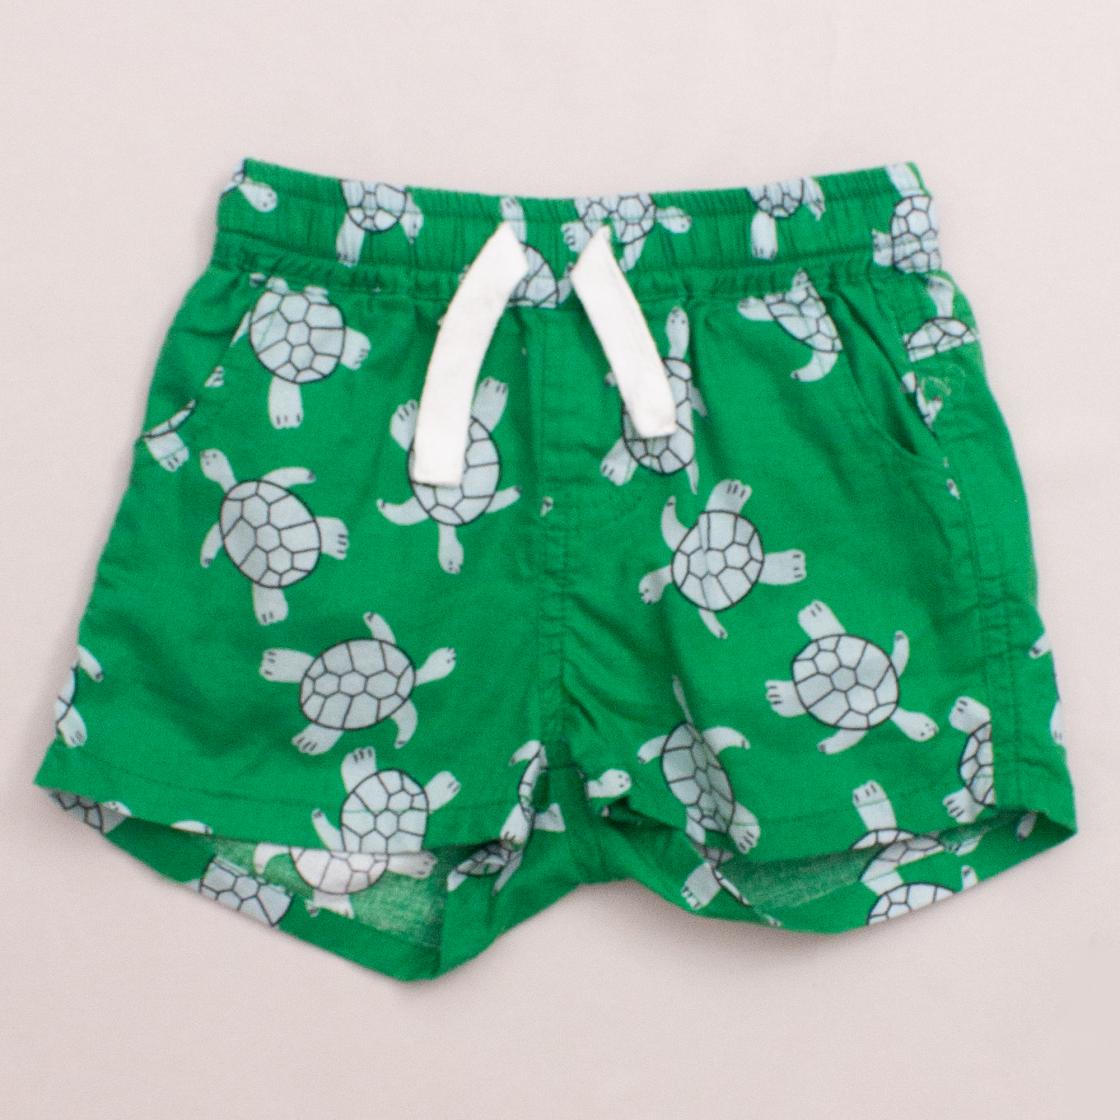 Seed Turtle Shorts